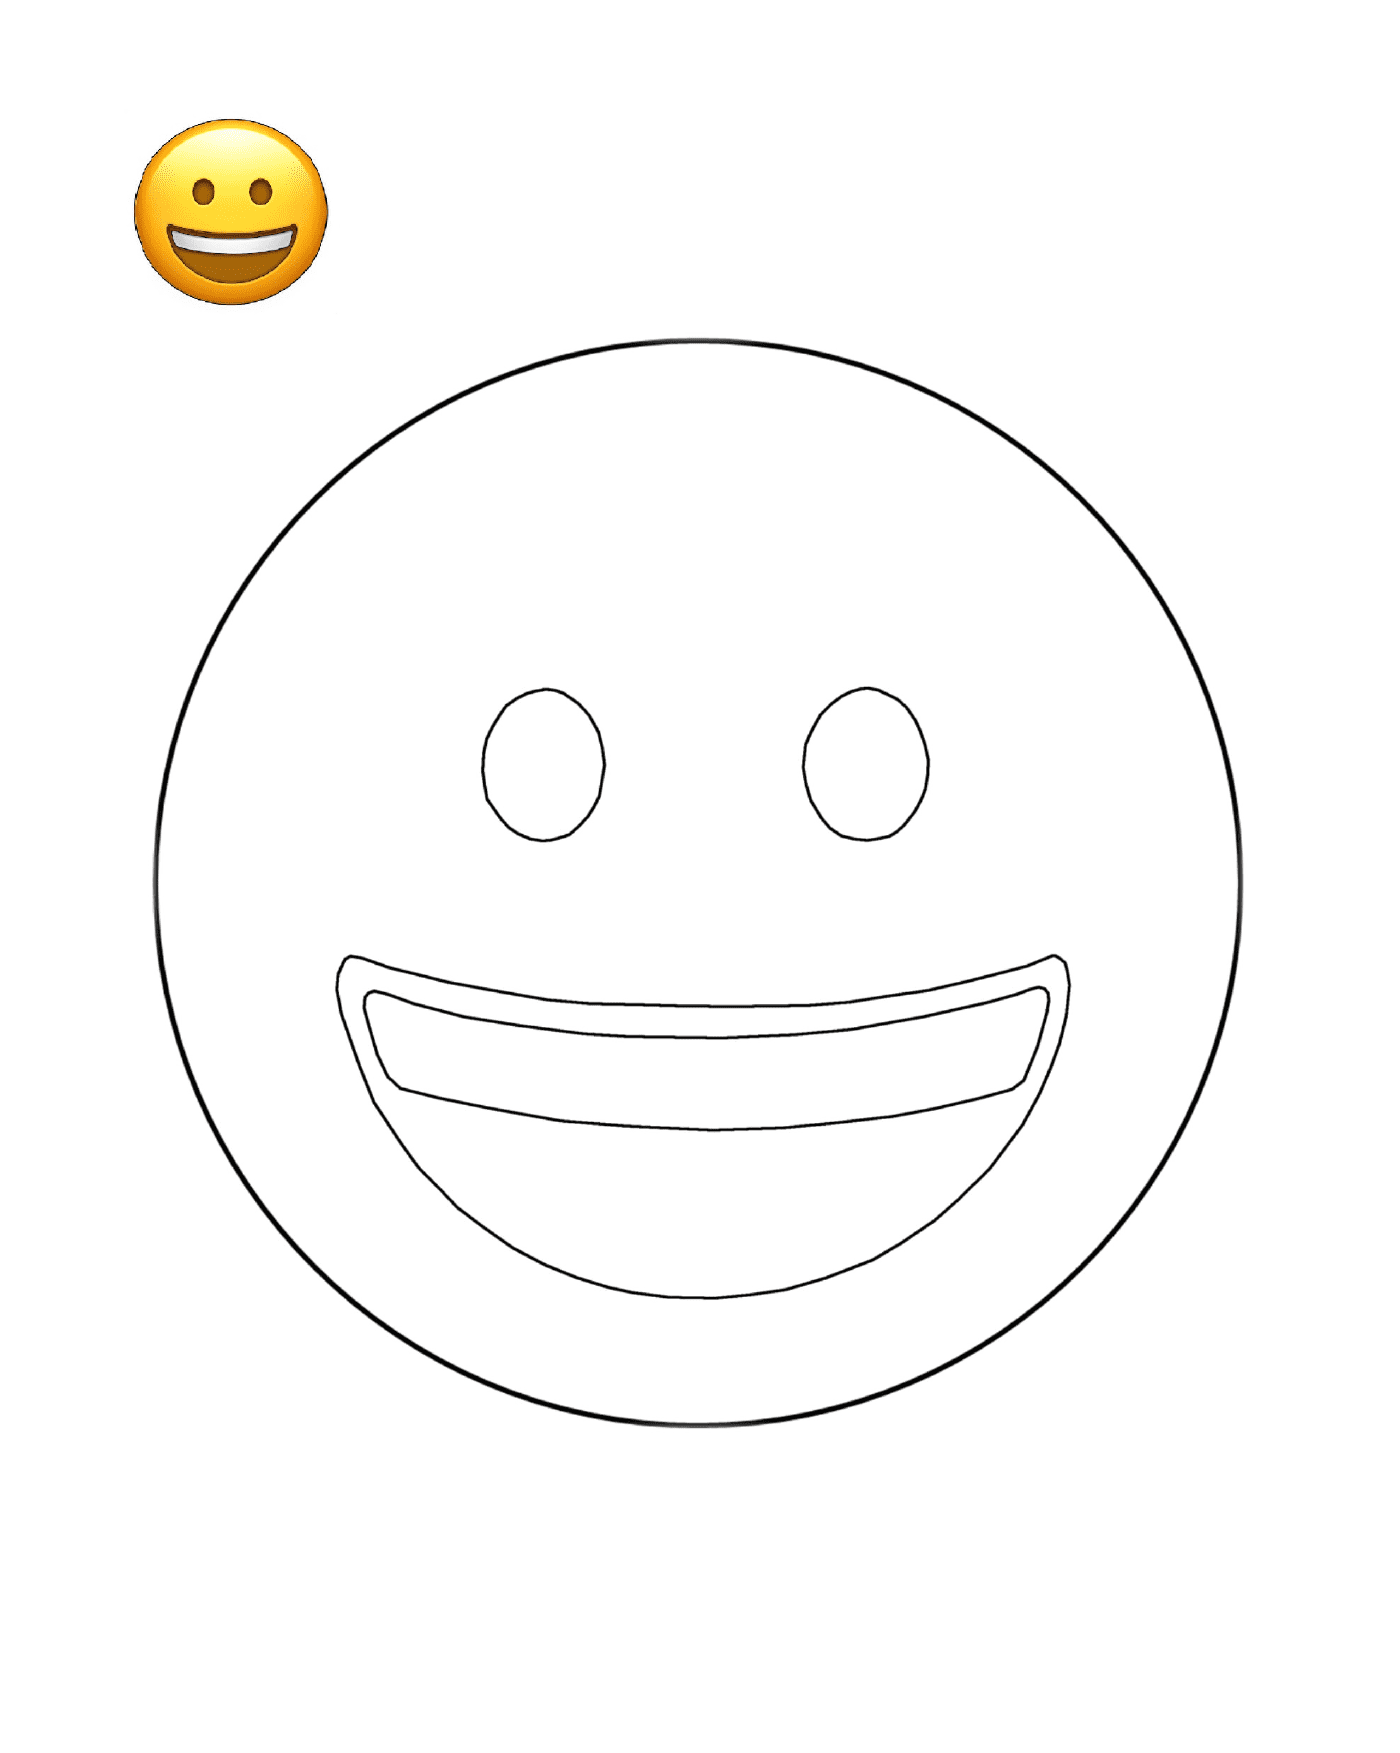  A smiling face appears 